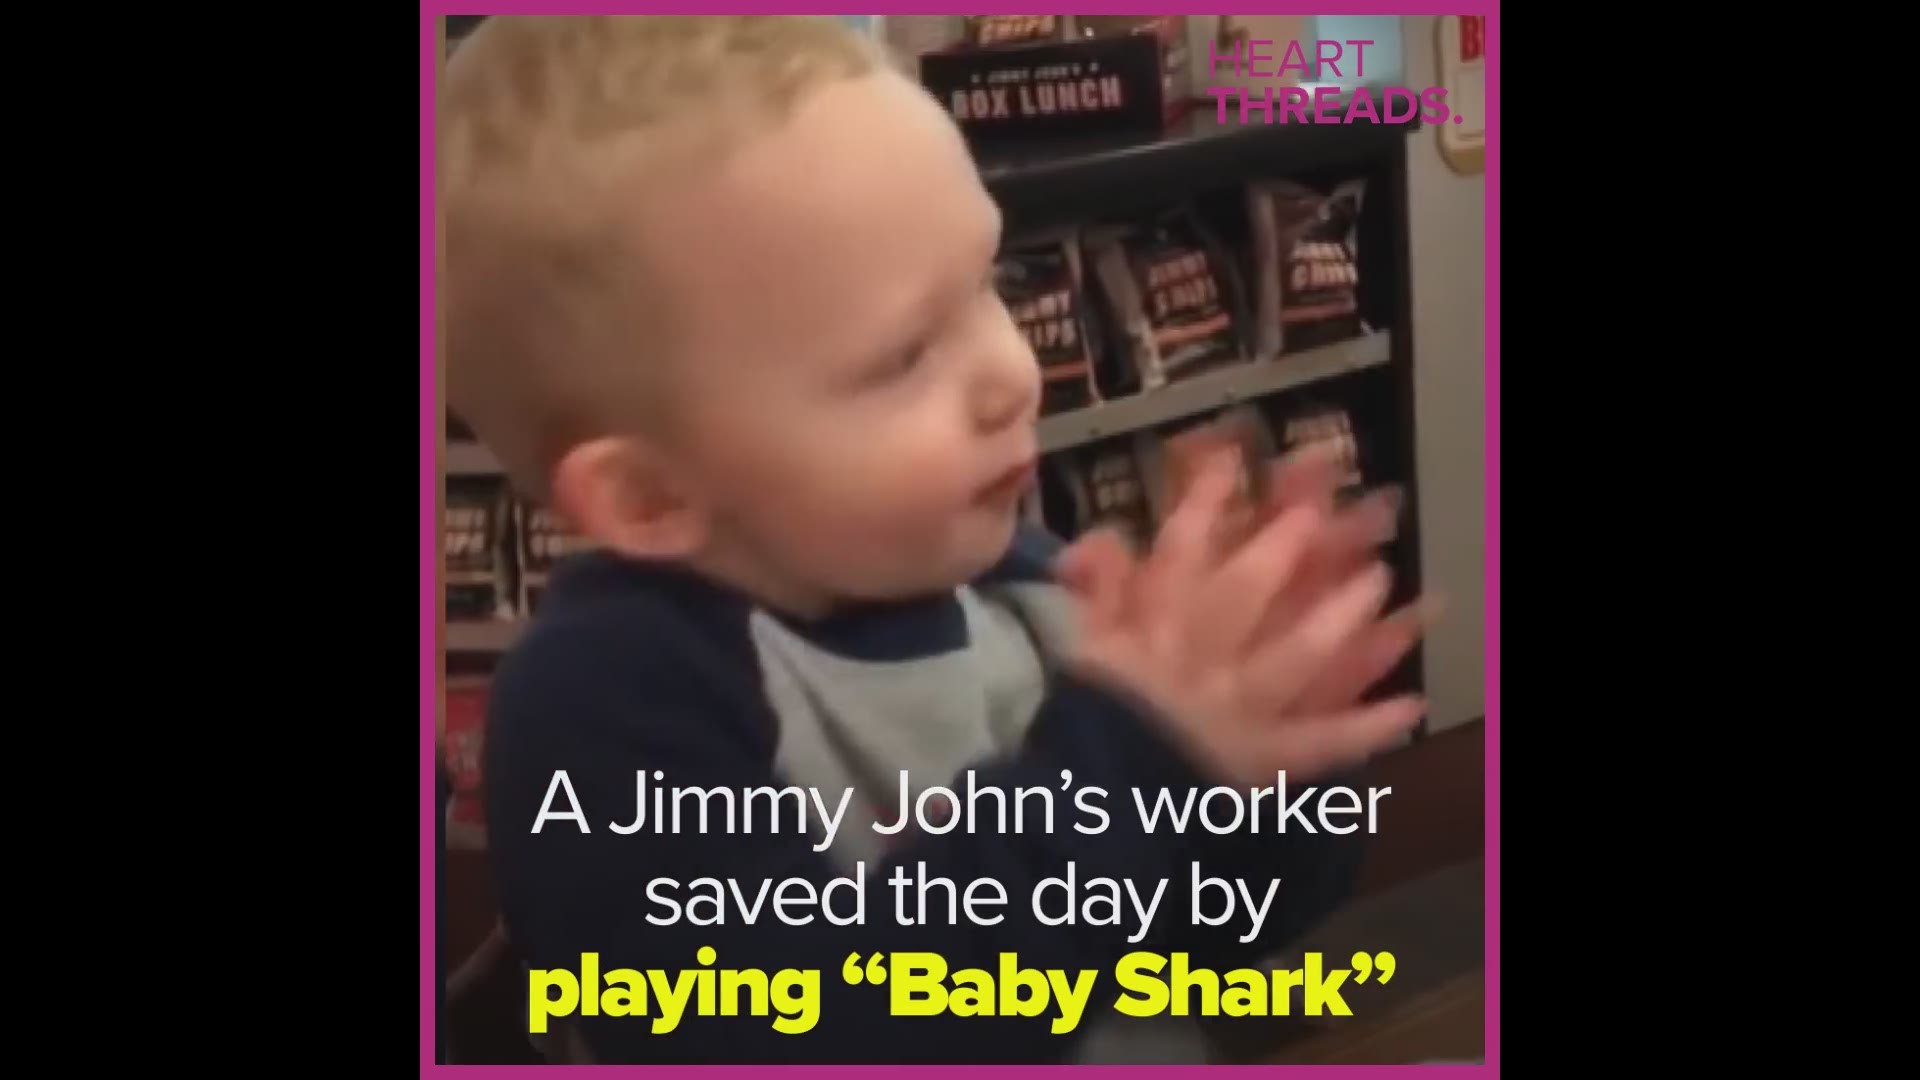 A quick thinking teen turned on "Baby Shark" to calm a fussy baby and restored a mom's faith in people.